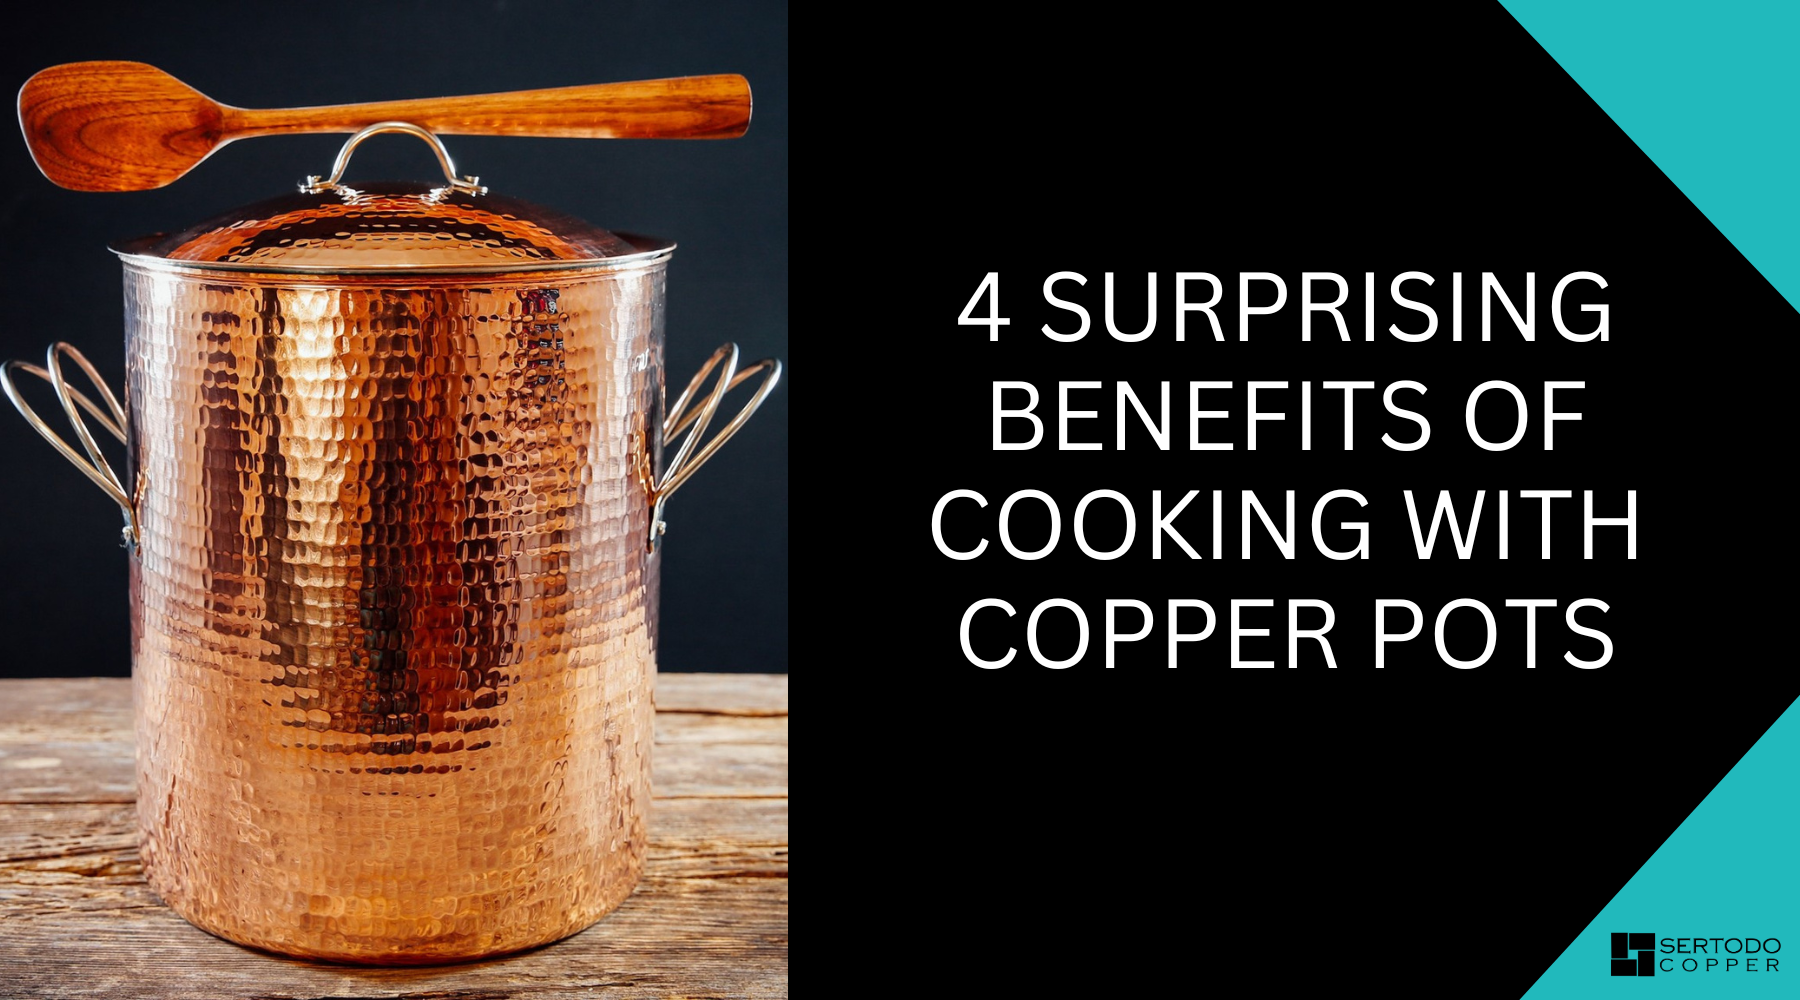 Cooking with copper pots benefits